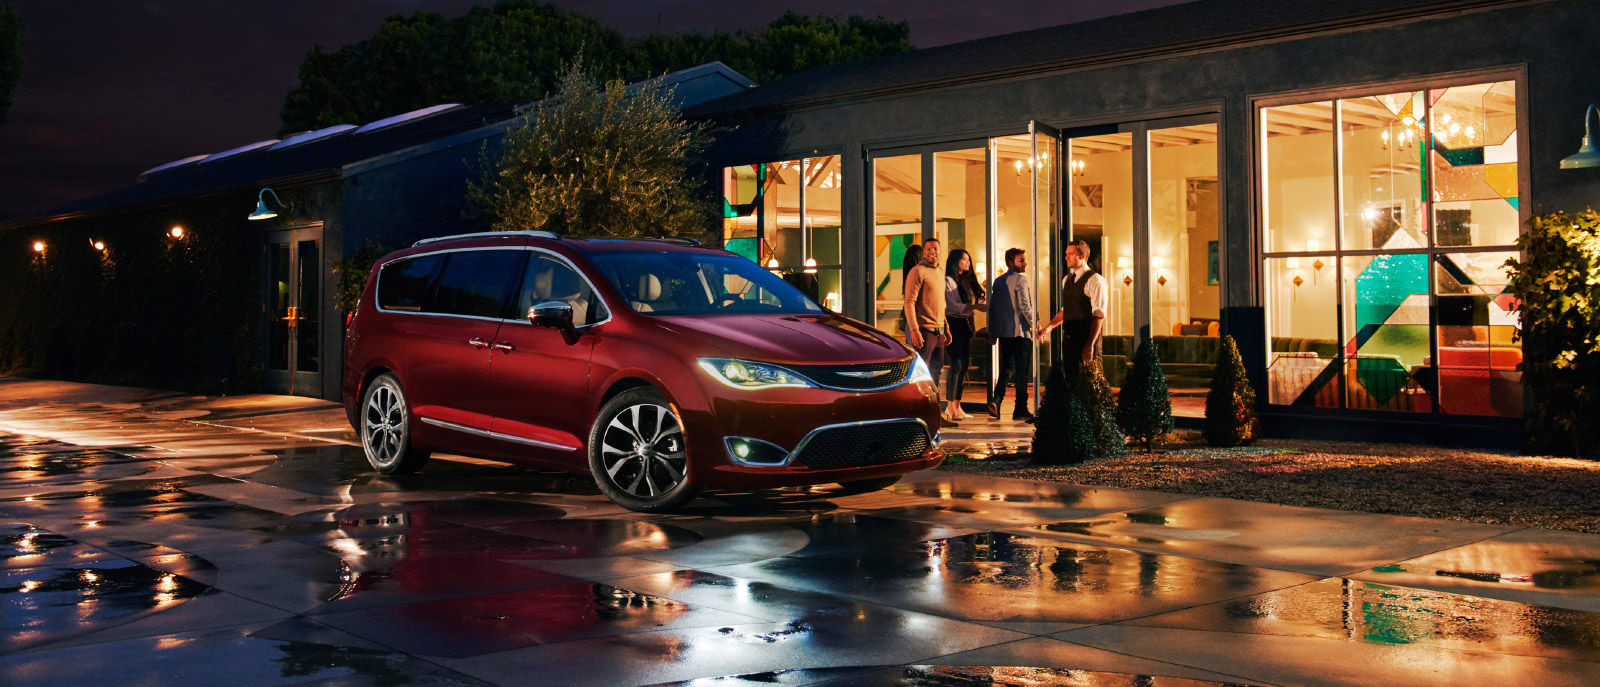 2017 Red Pacifica Exterior Friends